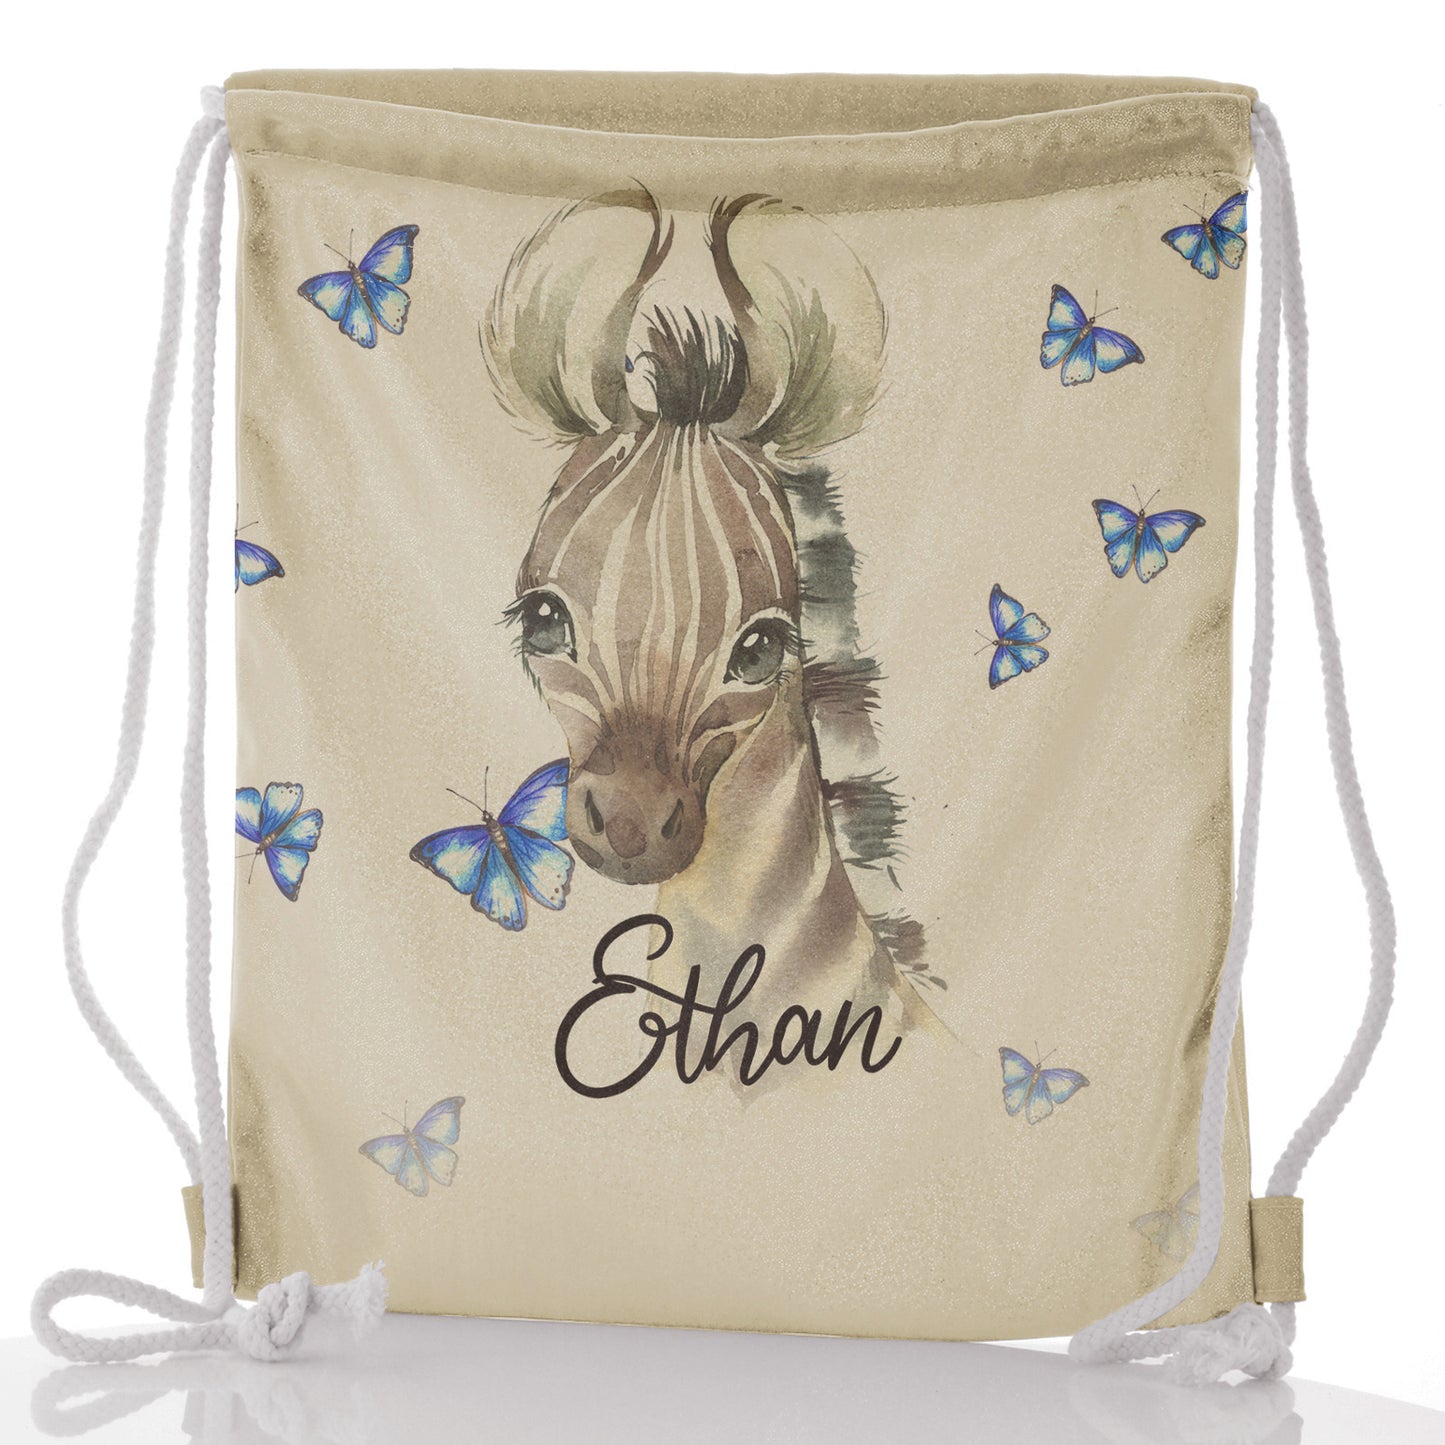 Personalised Glitter Drawstring Backpack with Zebra Blue Butterfly and Cute Text